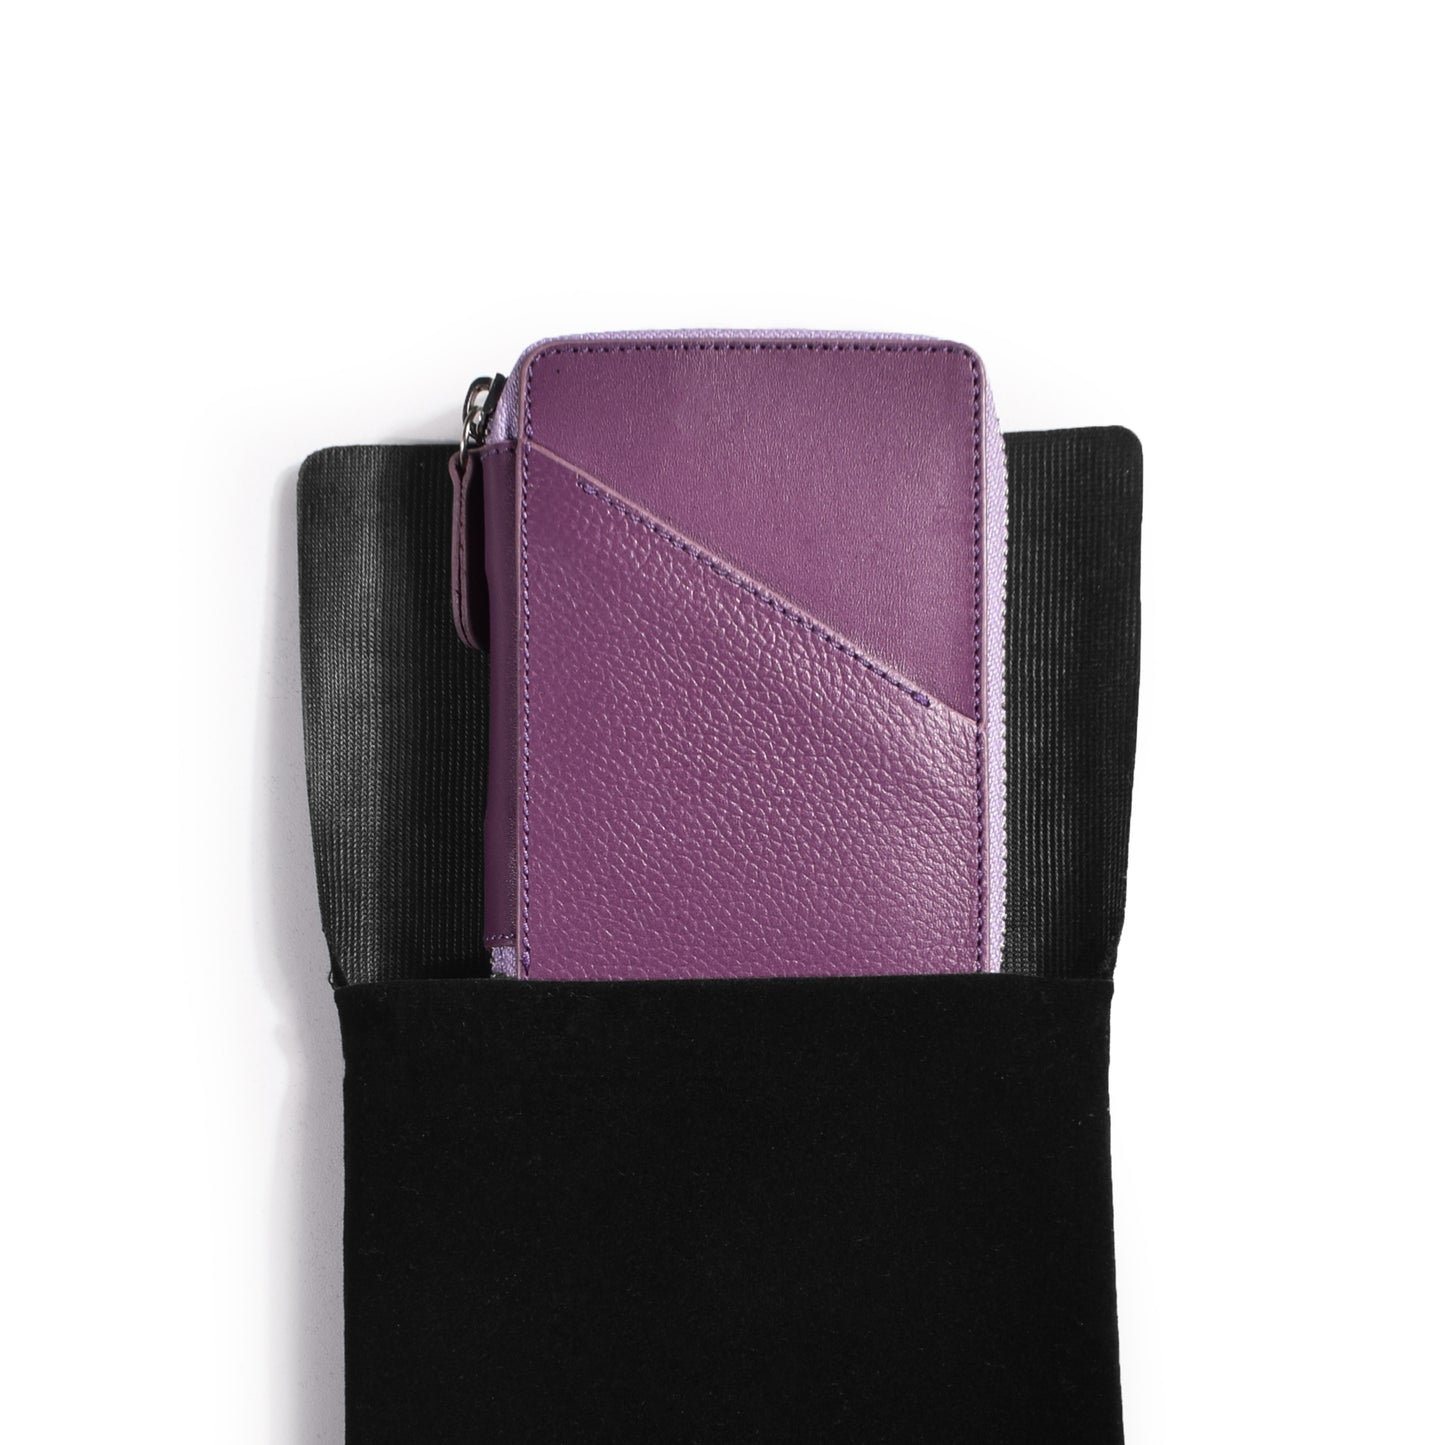 Royal purble SECURED Card Holder